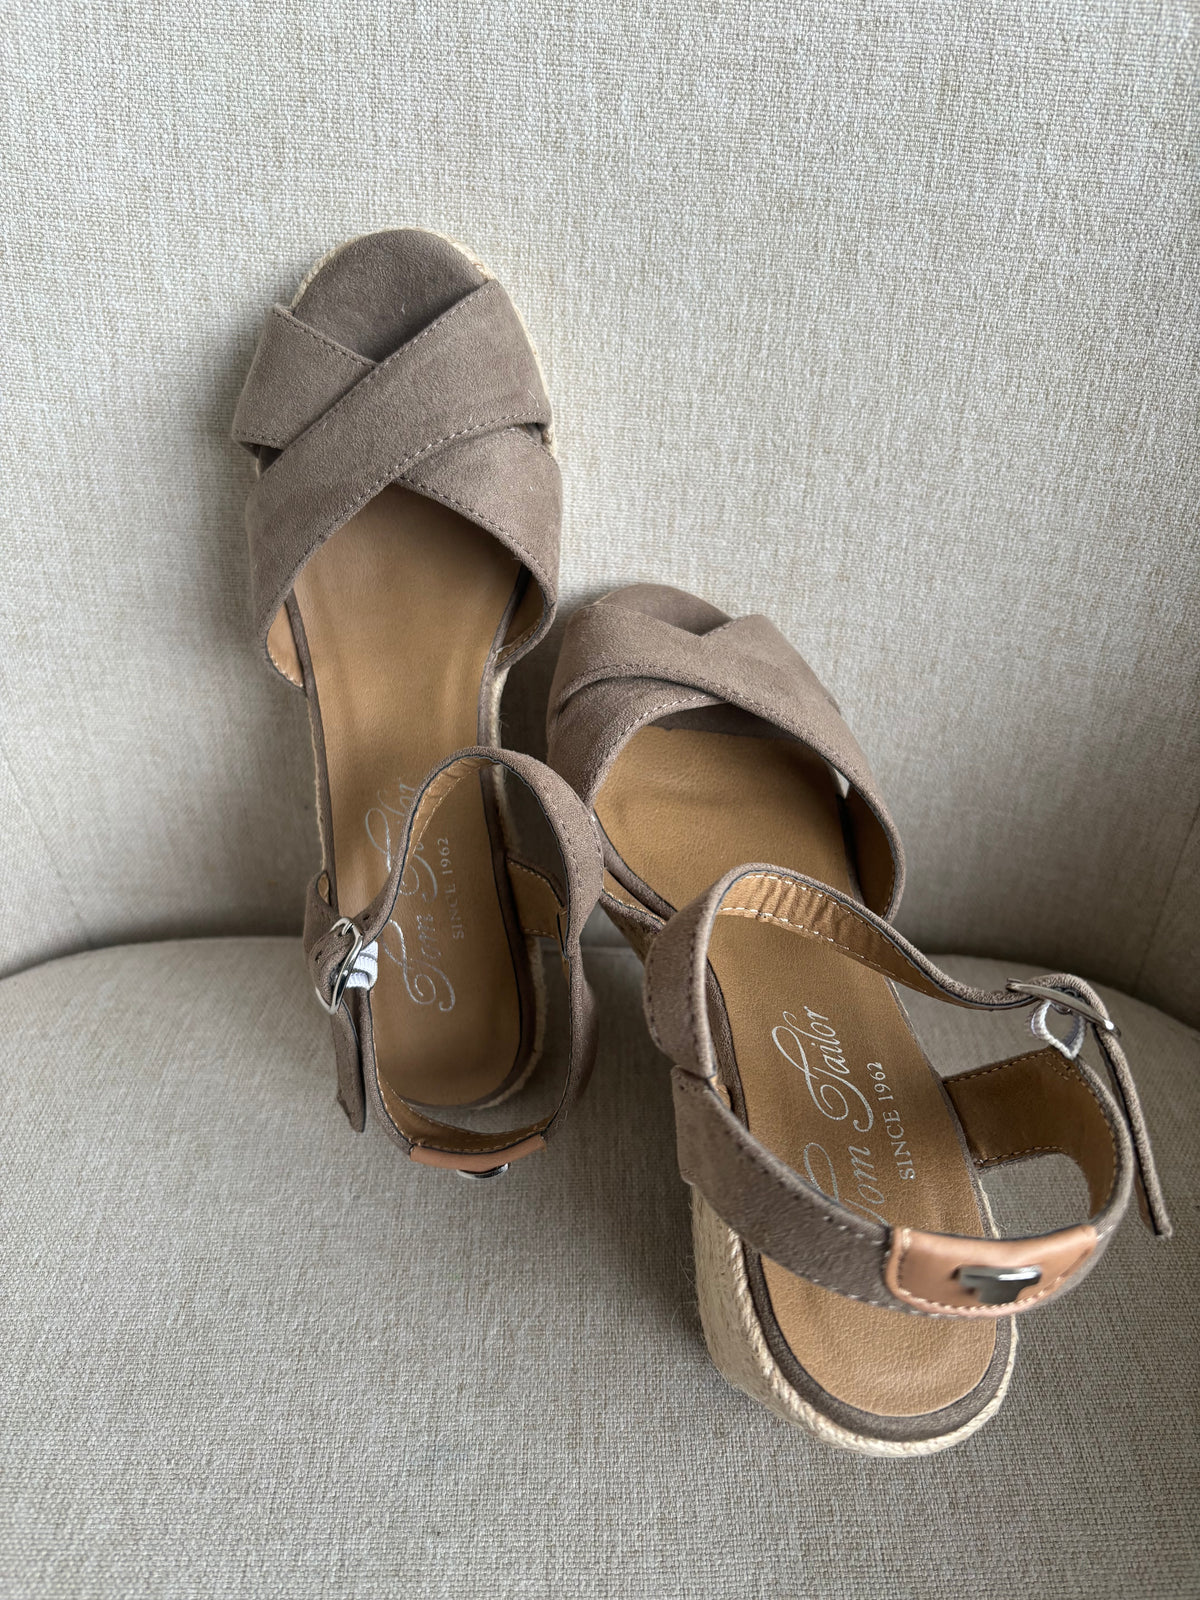 Tom Tailor Taupe Brown Wedge Sandals Size 4 UK